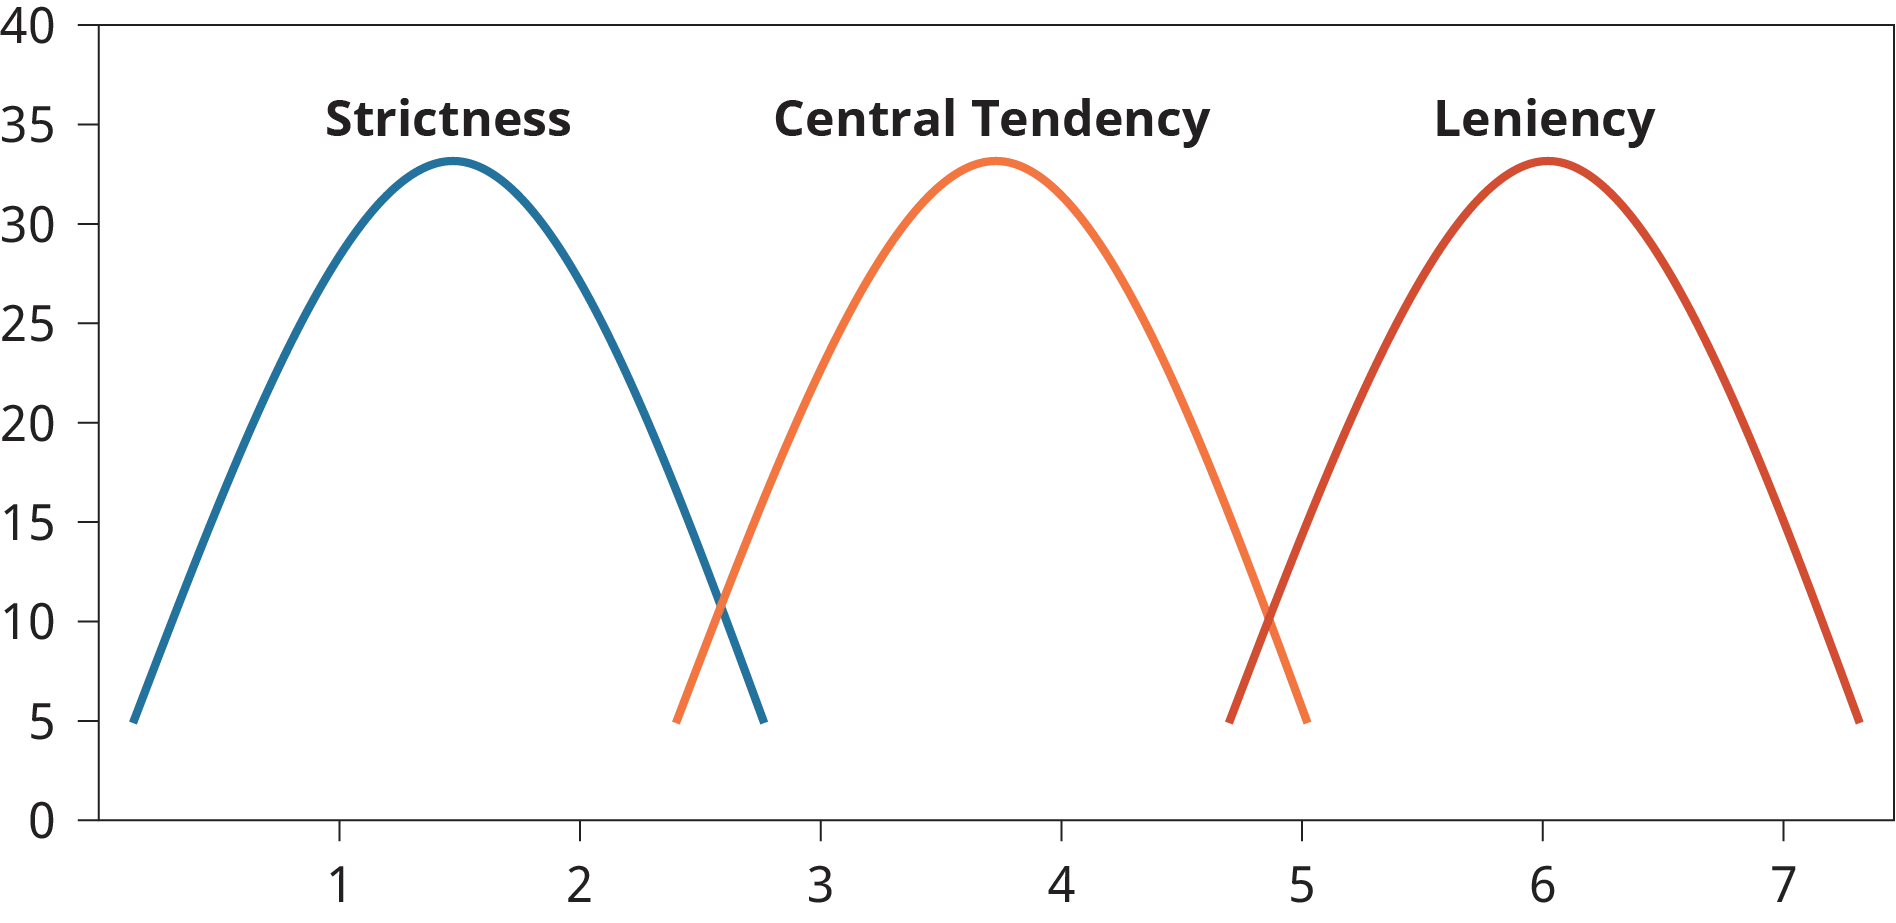 A graph plots strictness, central tendency, and leniency as parabolic curves.